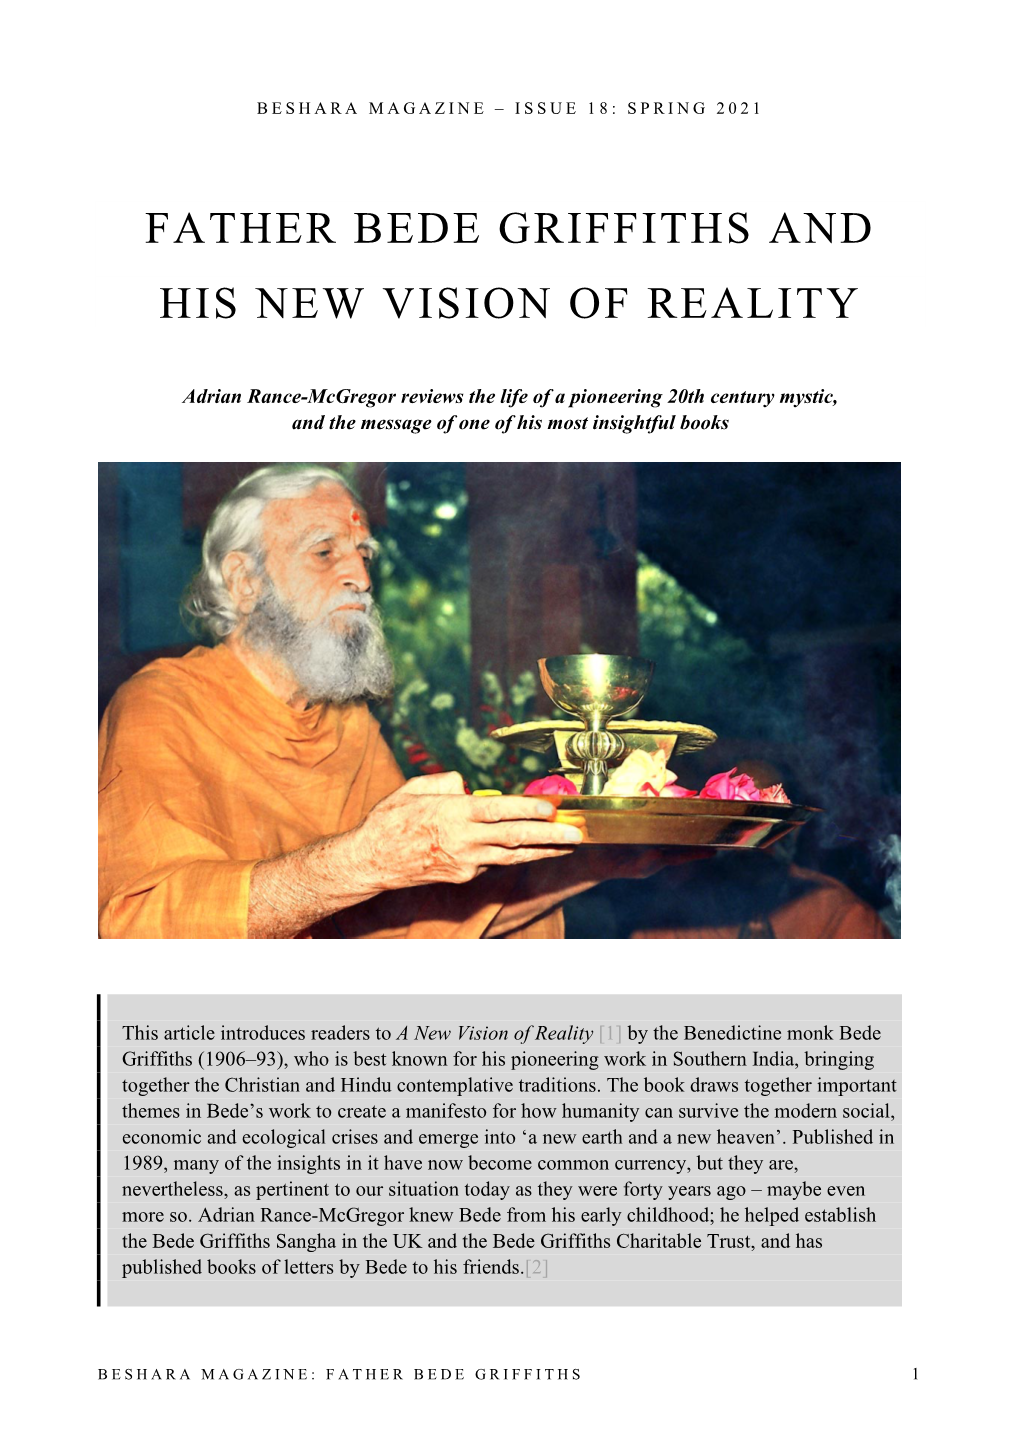 Father Bede Griffiths and His New Vision of Reality